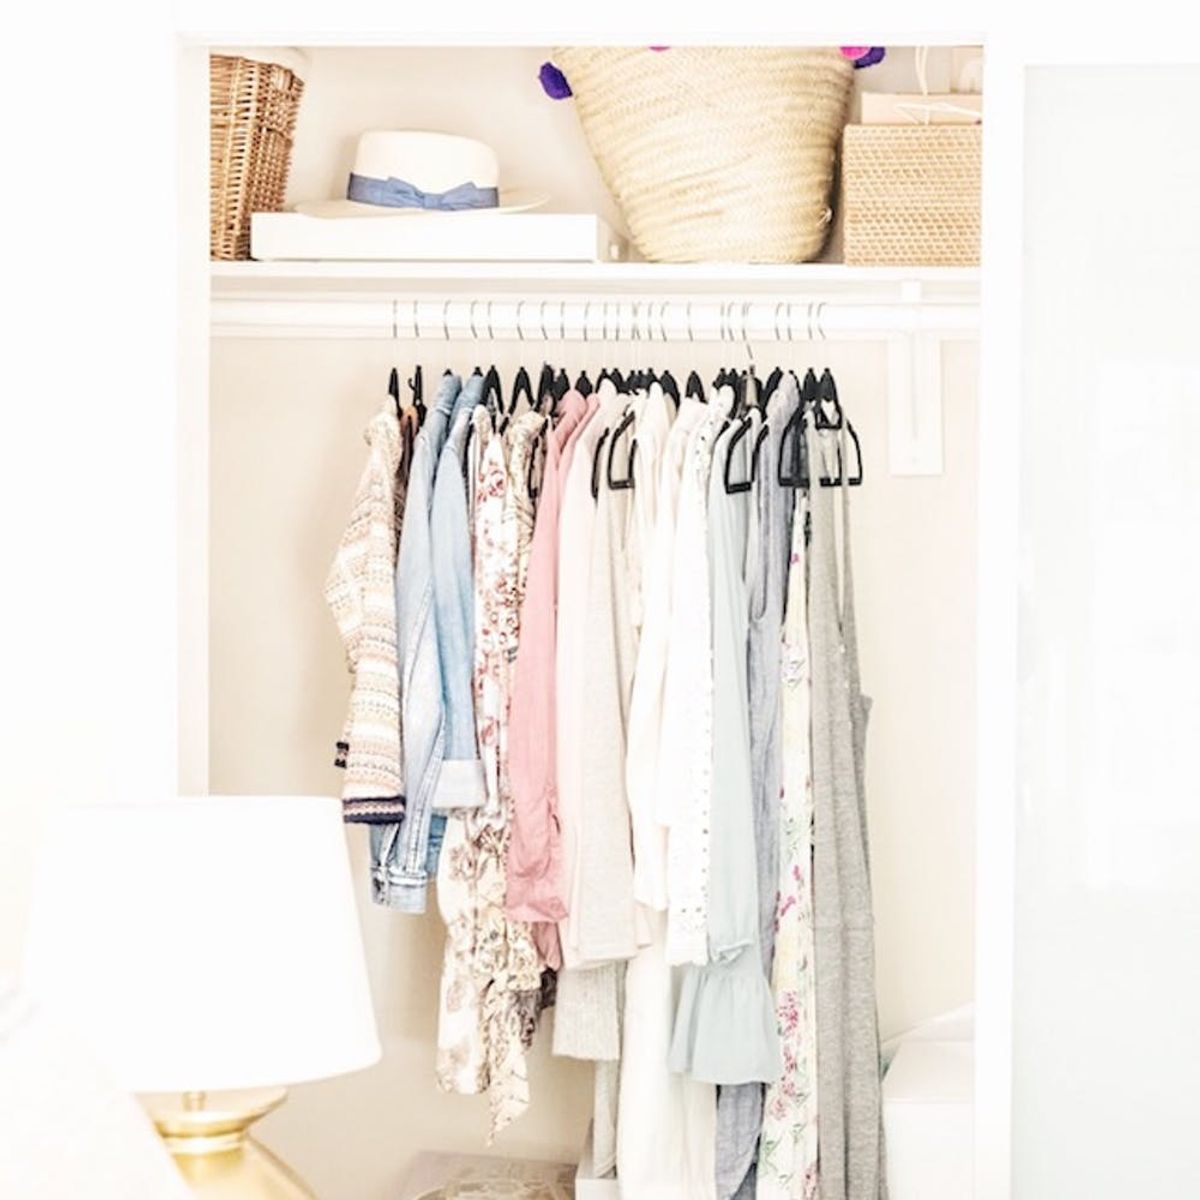 8 Tips to Finally Reclaim Your Closet Space